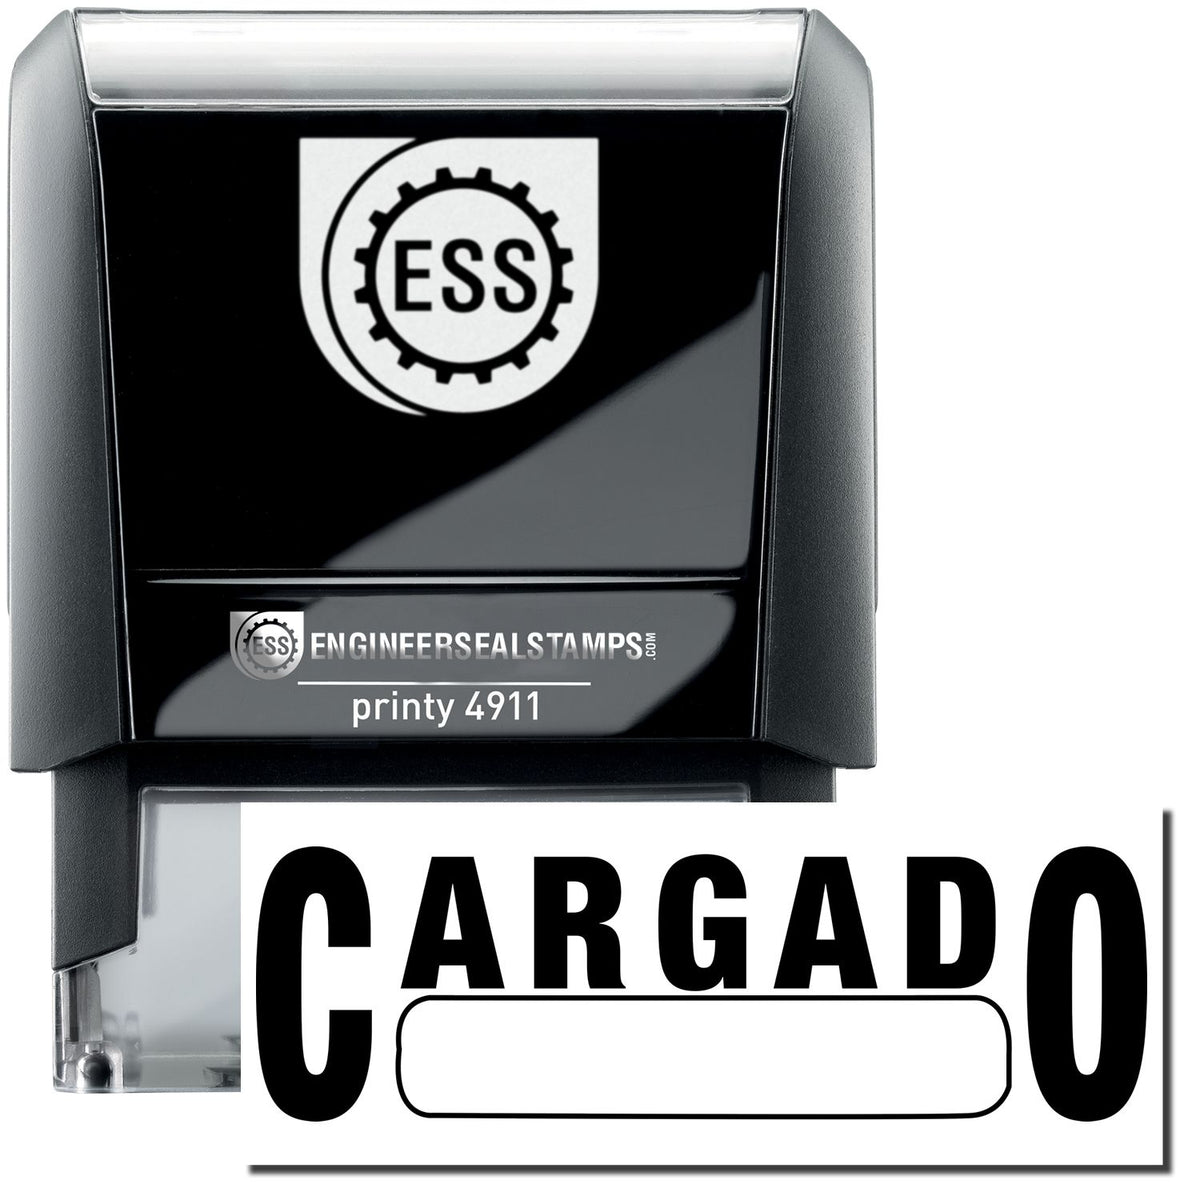 A self-inking stamp with a stamped image showing how the text &quot;CARGADO&quot; with a box below the text is displayed after stamping.